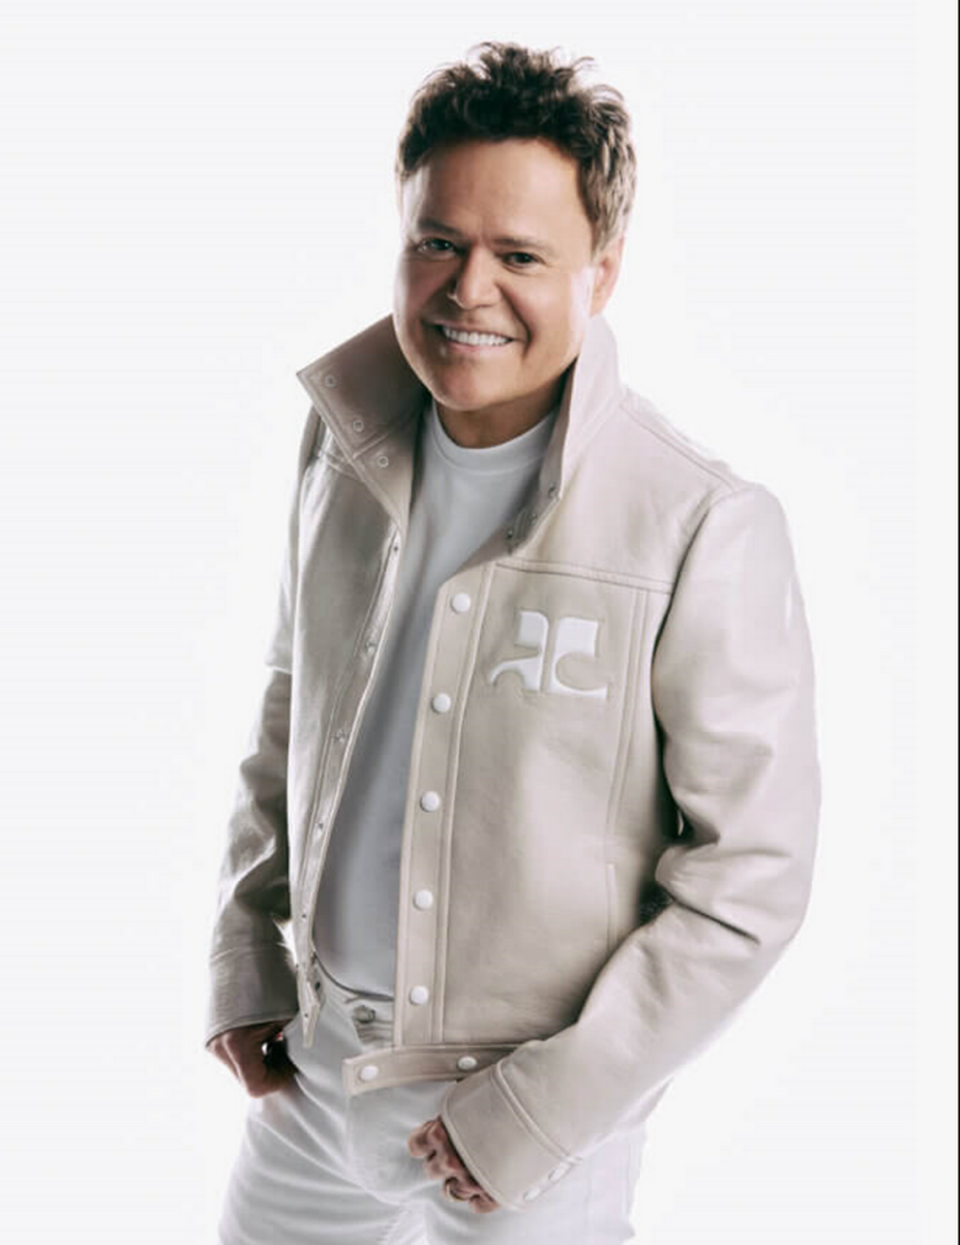 Donny Osmond is heading to downtown Boise for an indoor arena concert this summer.